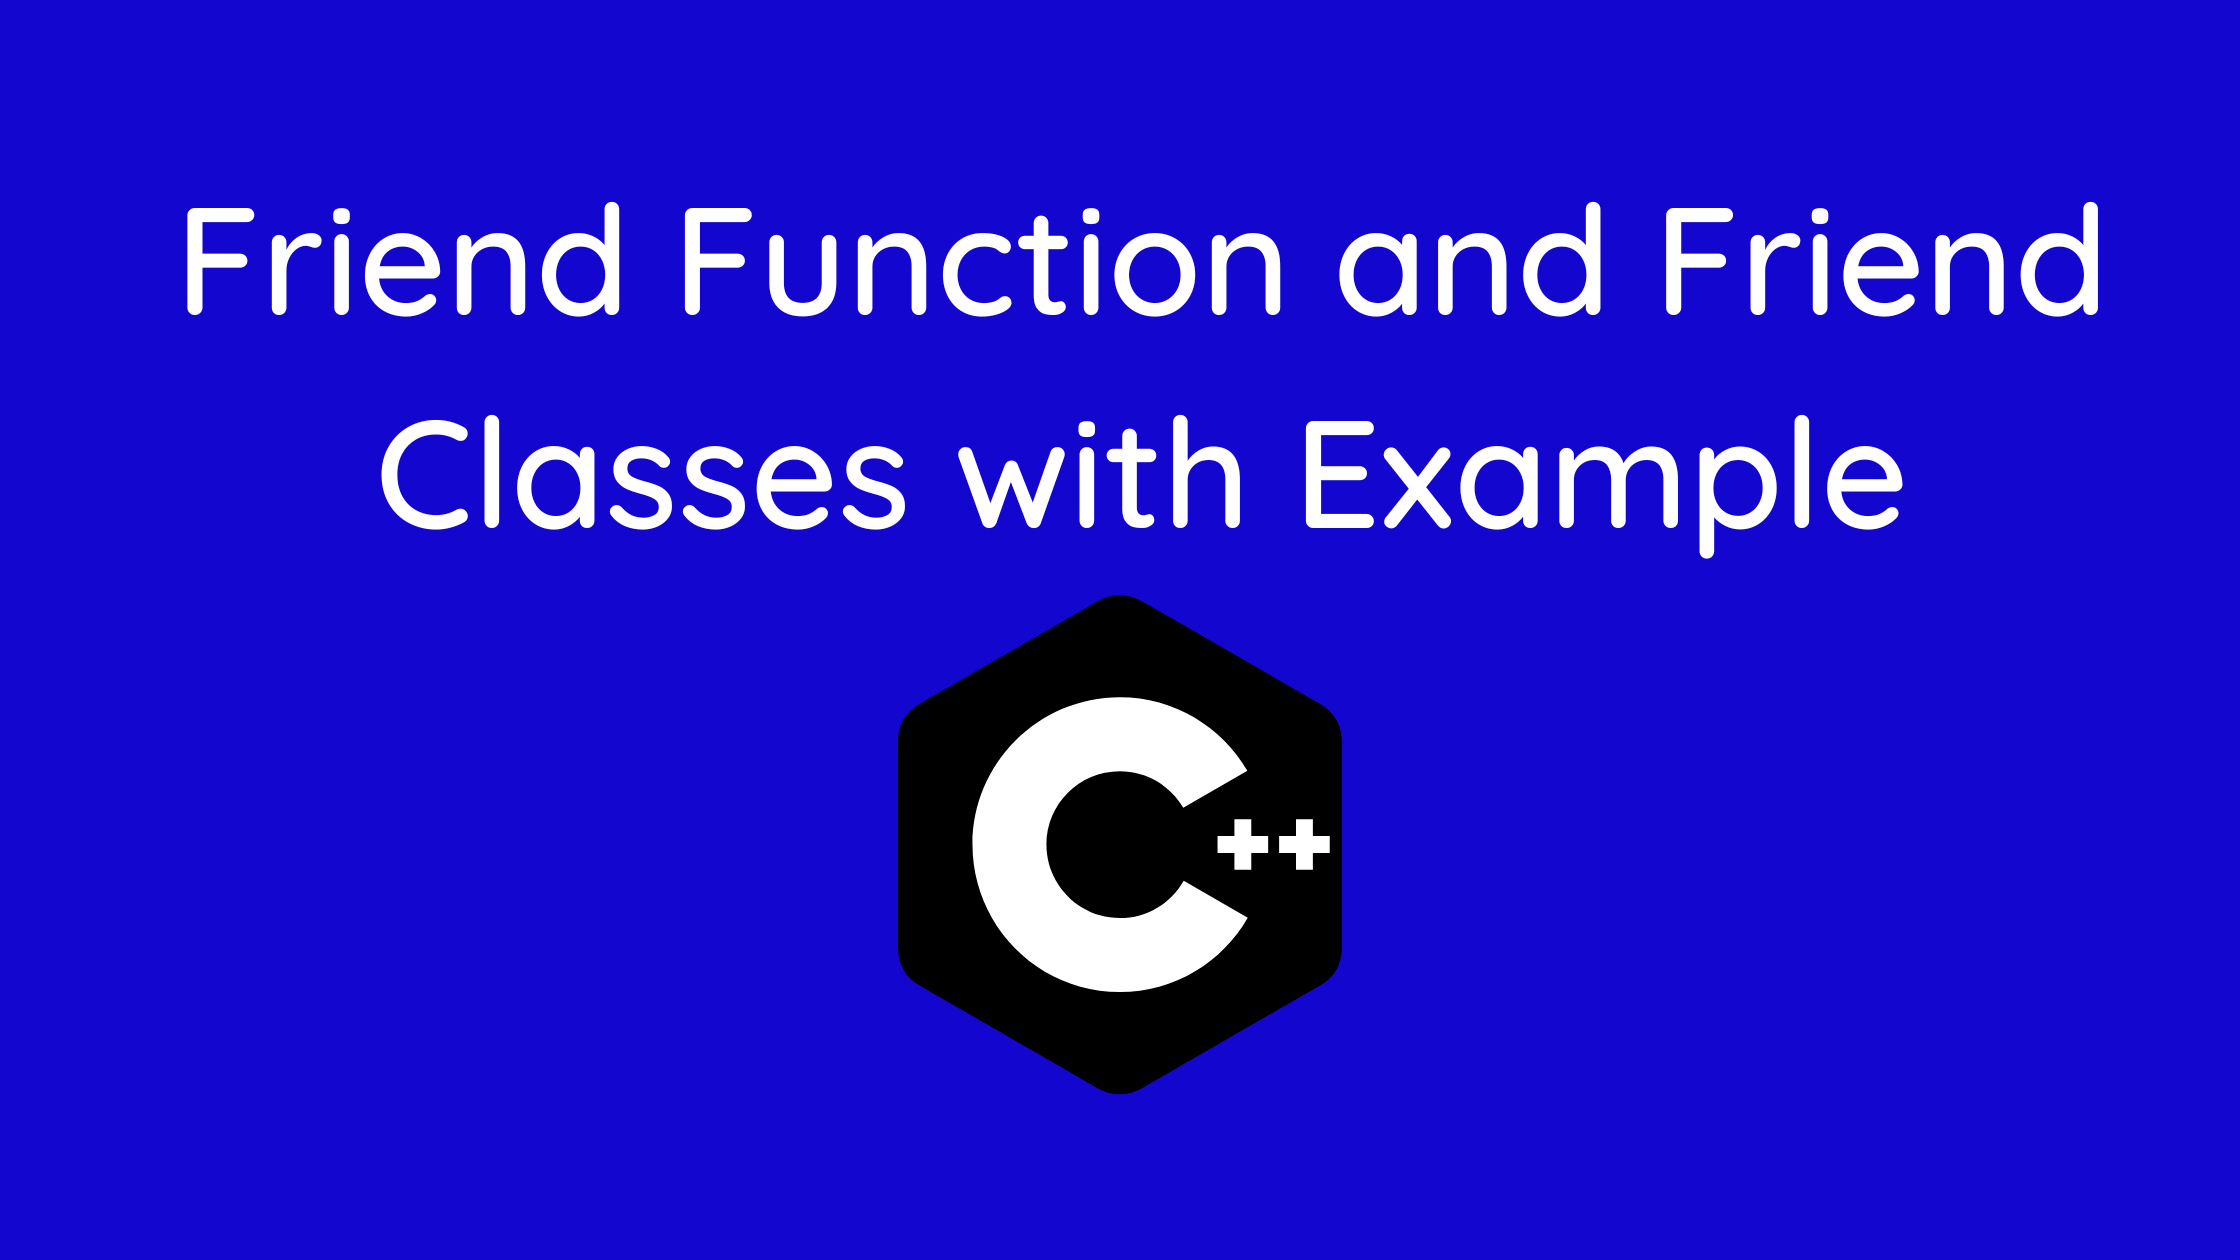 Friend Function and Friend Classes